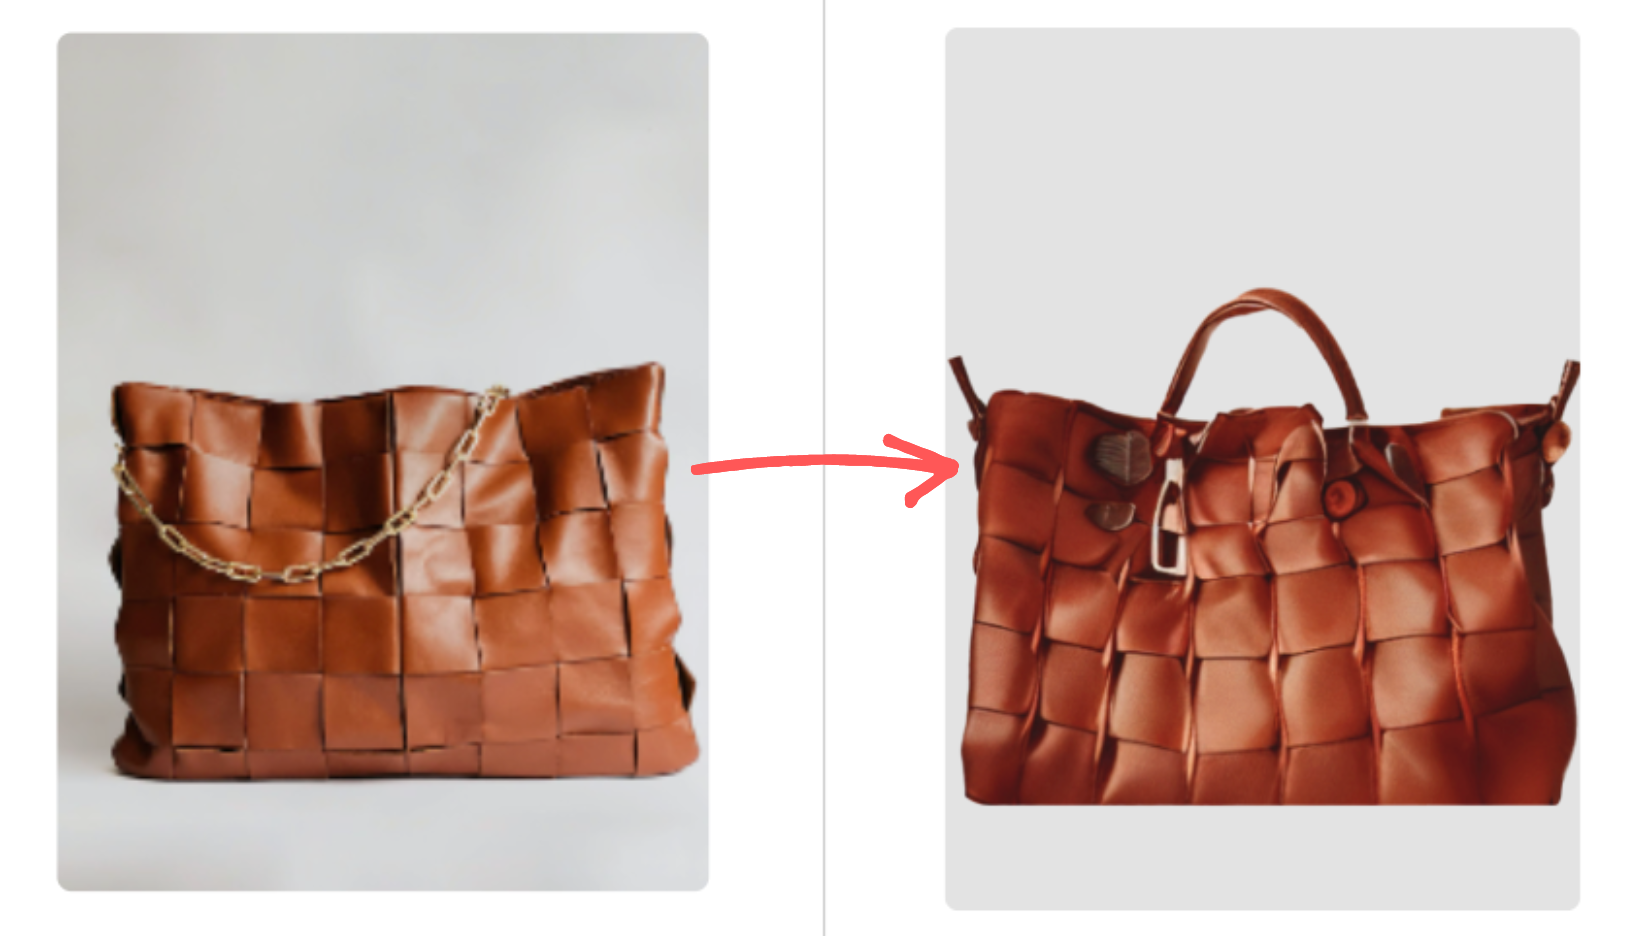 Bag features change